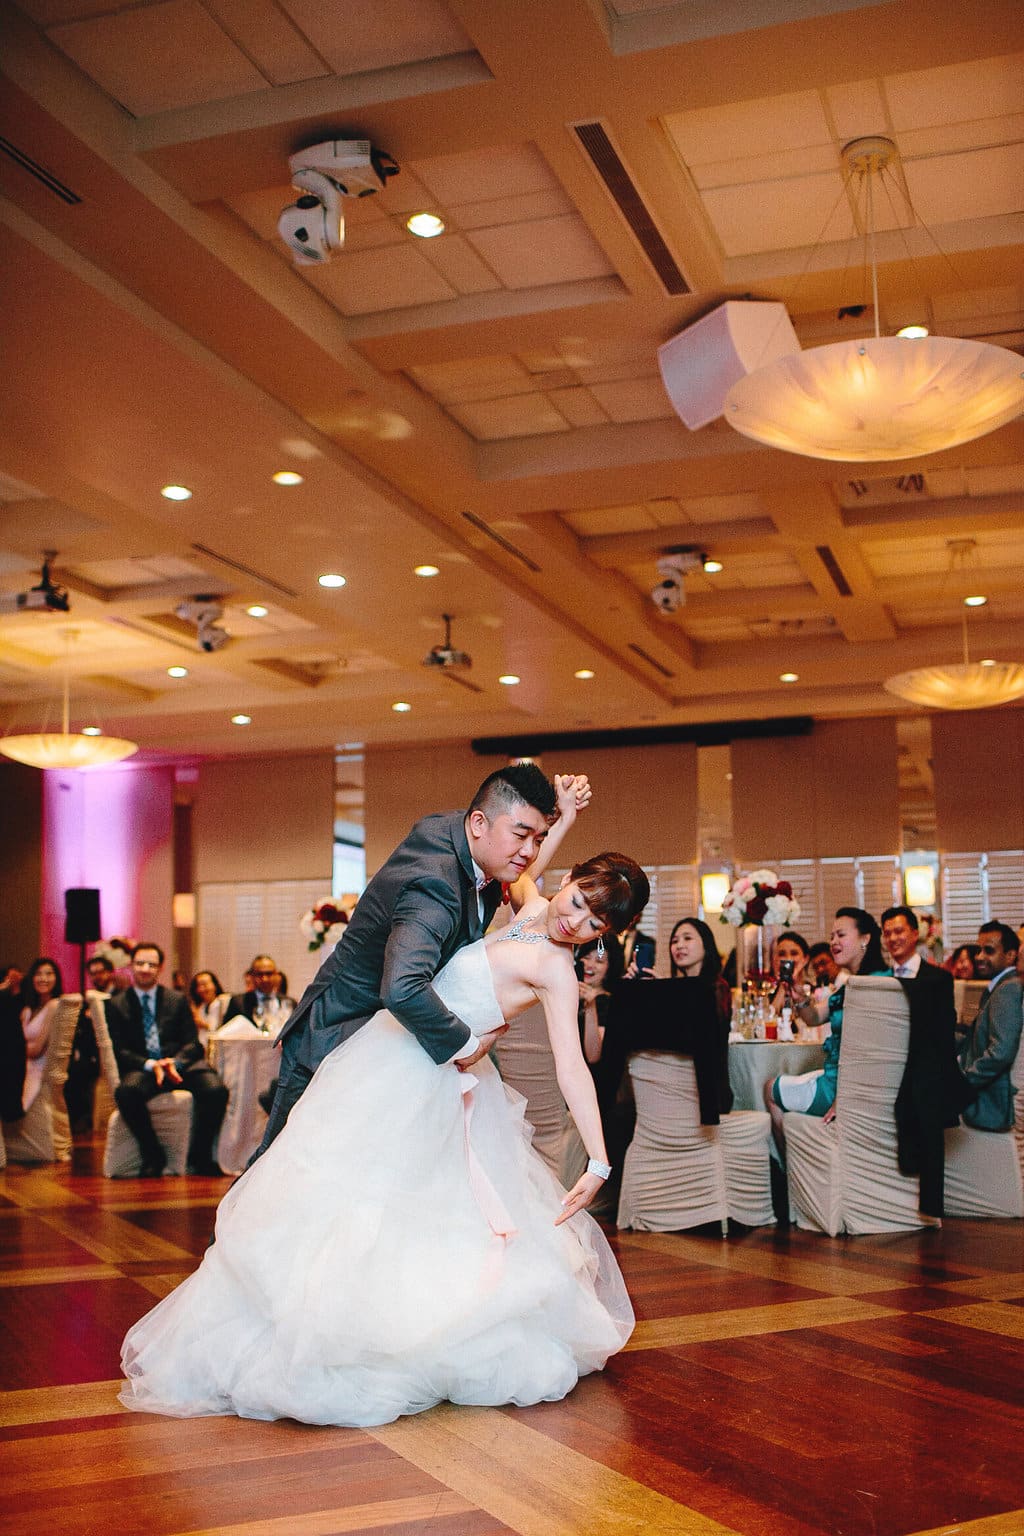 Bride and groom perform their ballroom dance routine. To see more, visit Rebecca Chan Weddings and Events http://www.rebeccachan.ca